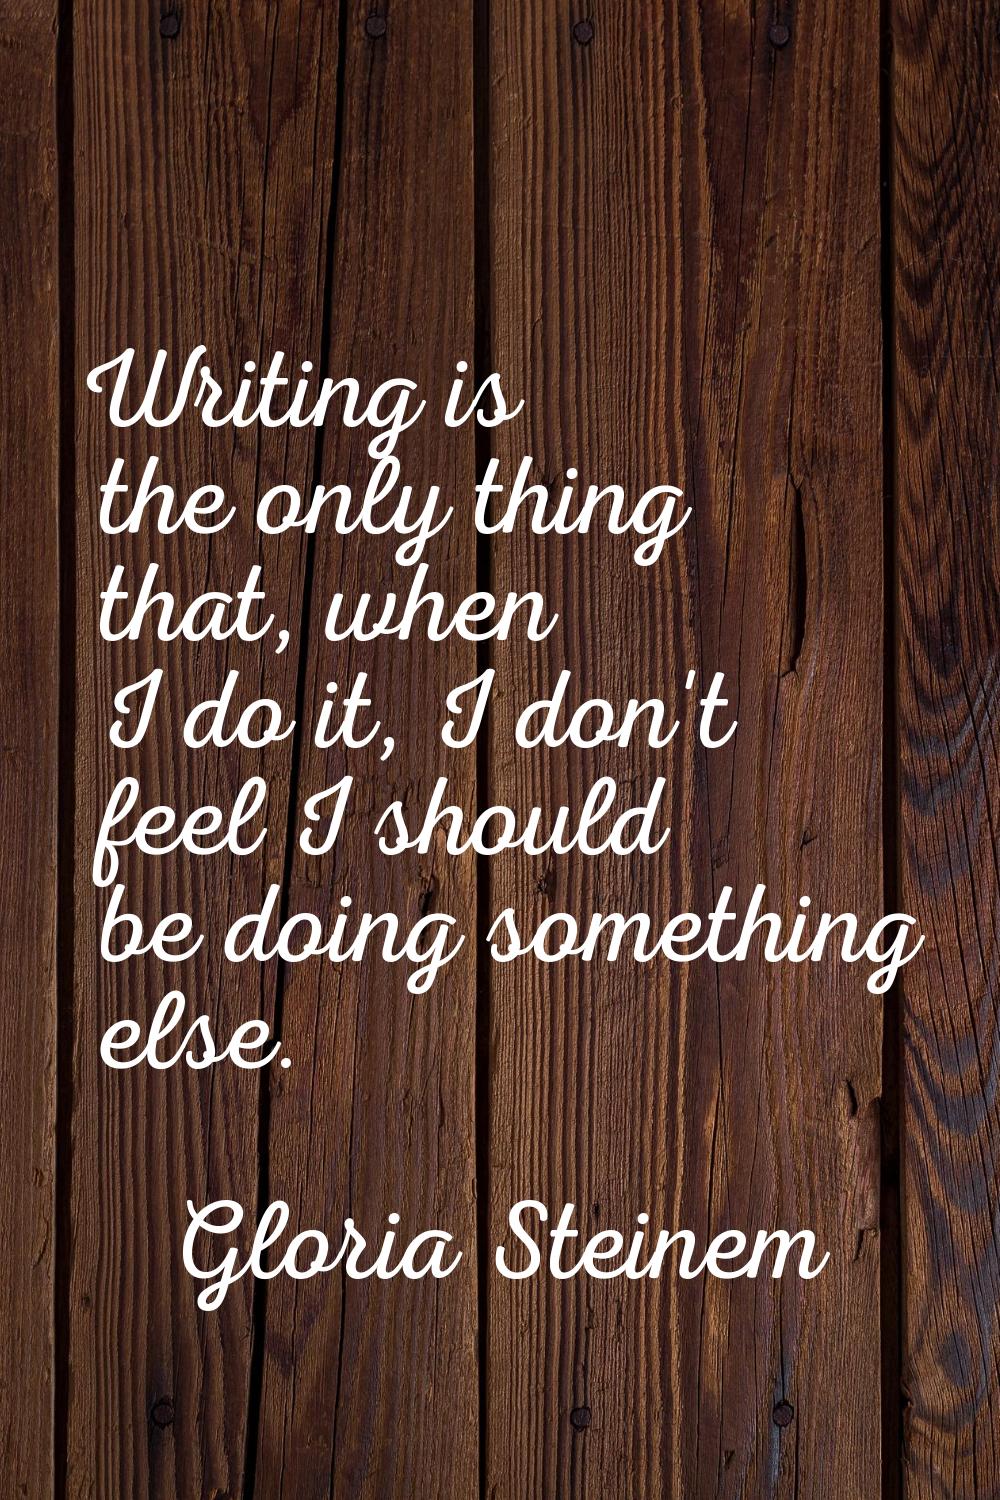 Writing is the only thing that, when I do it, I don't feel I should be doing something else.